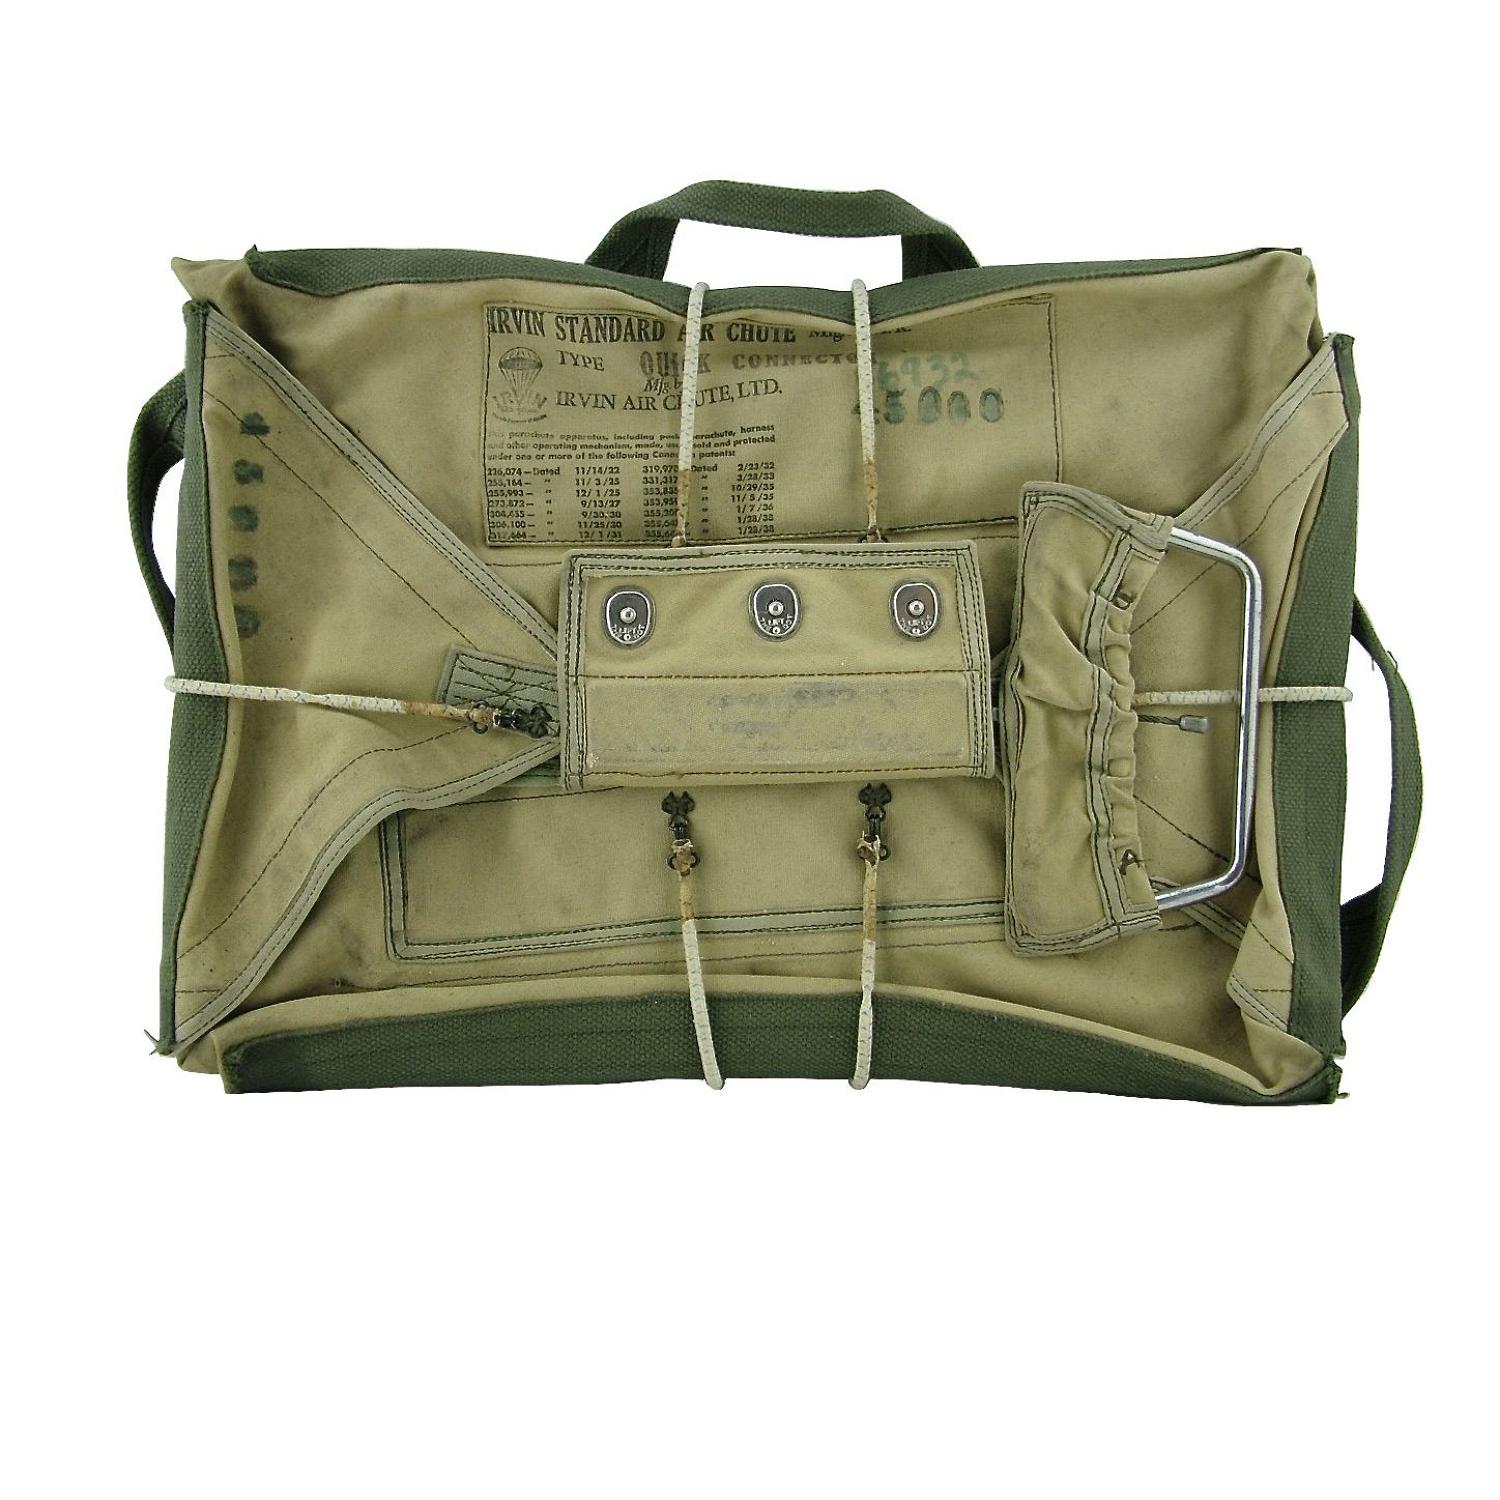 RCAF / RAF seat type parachute pack